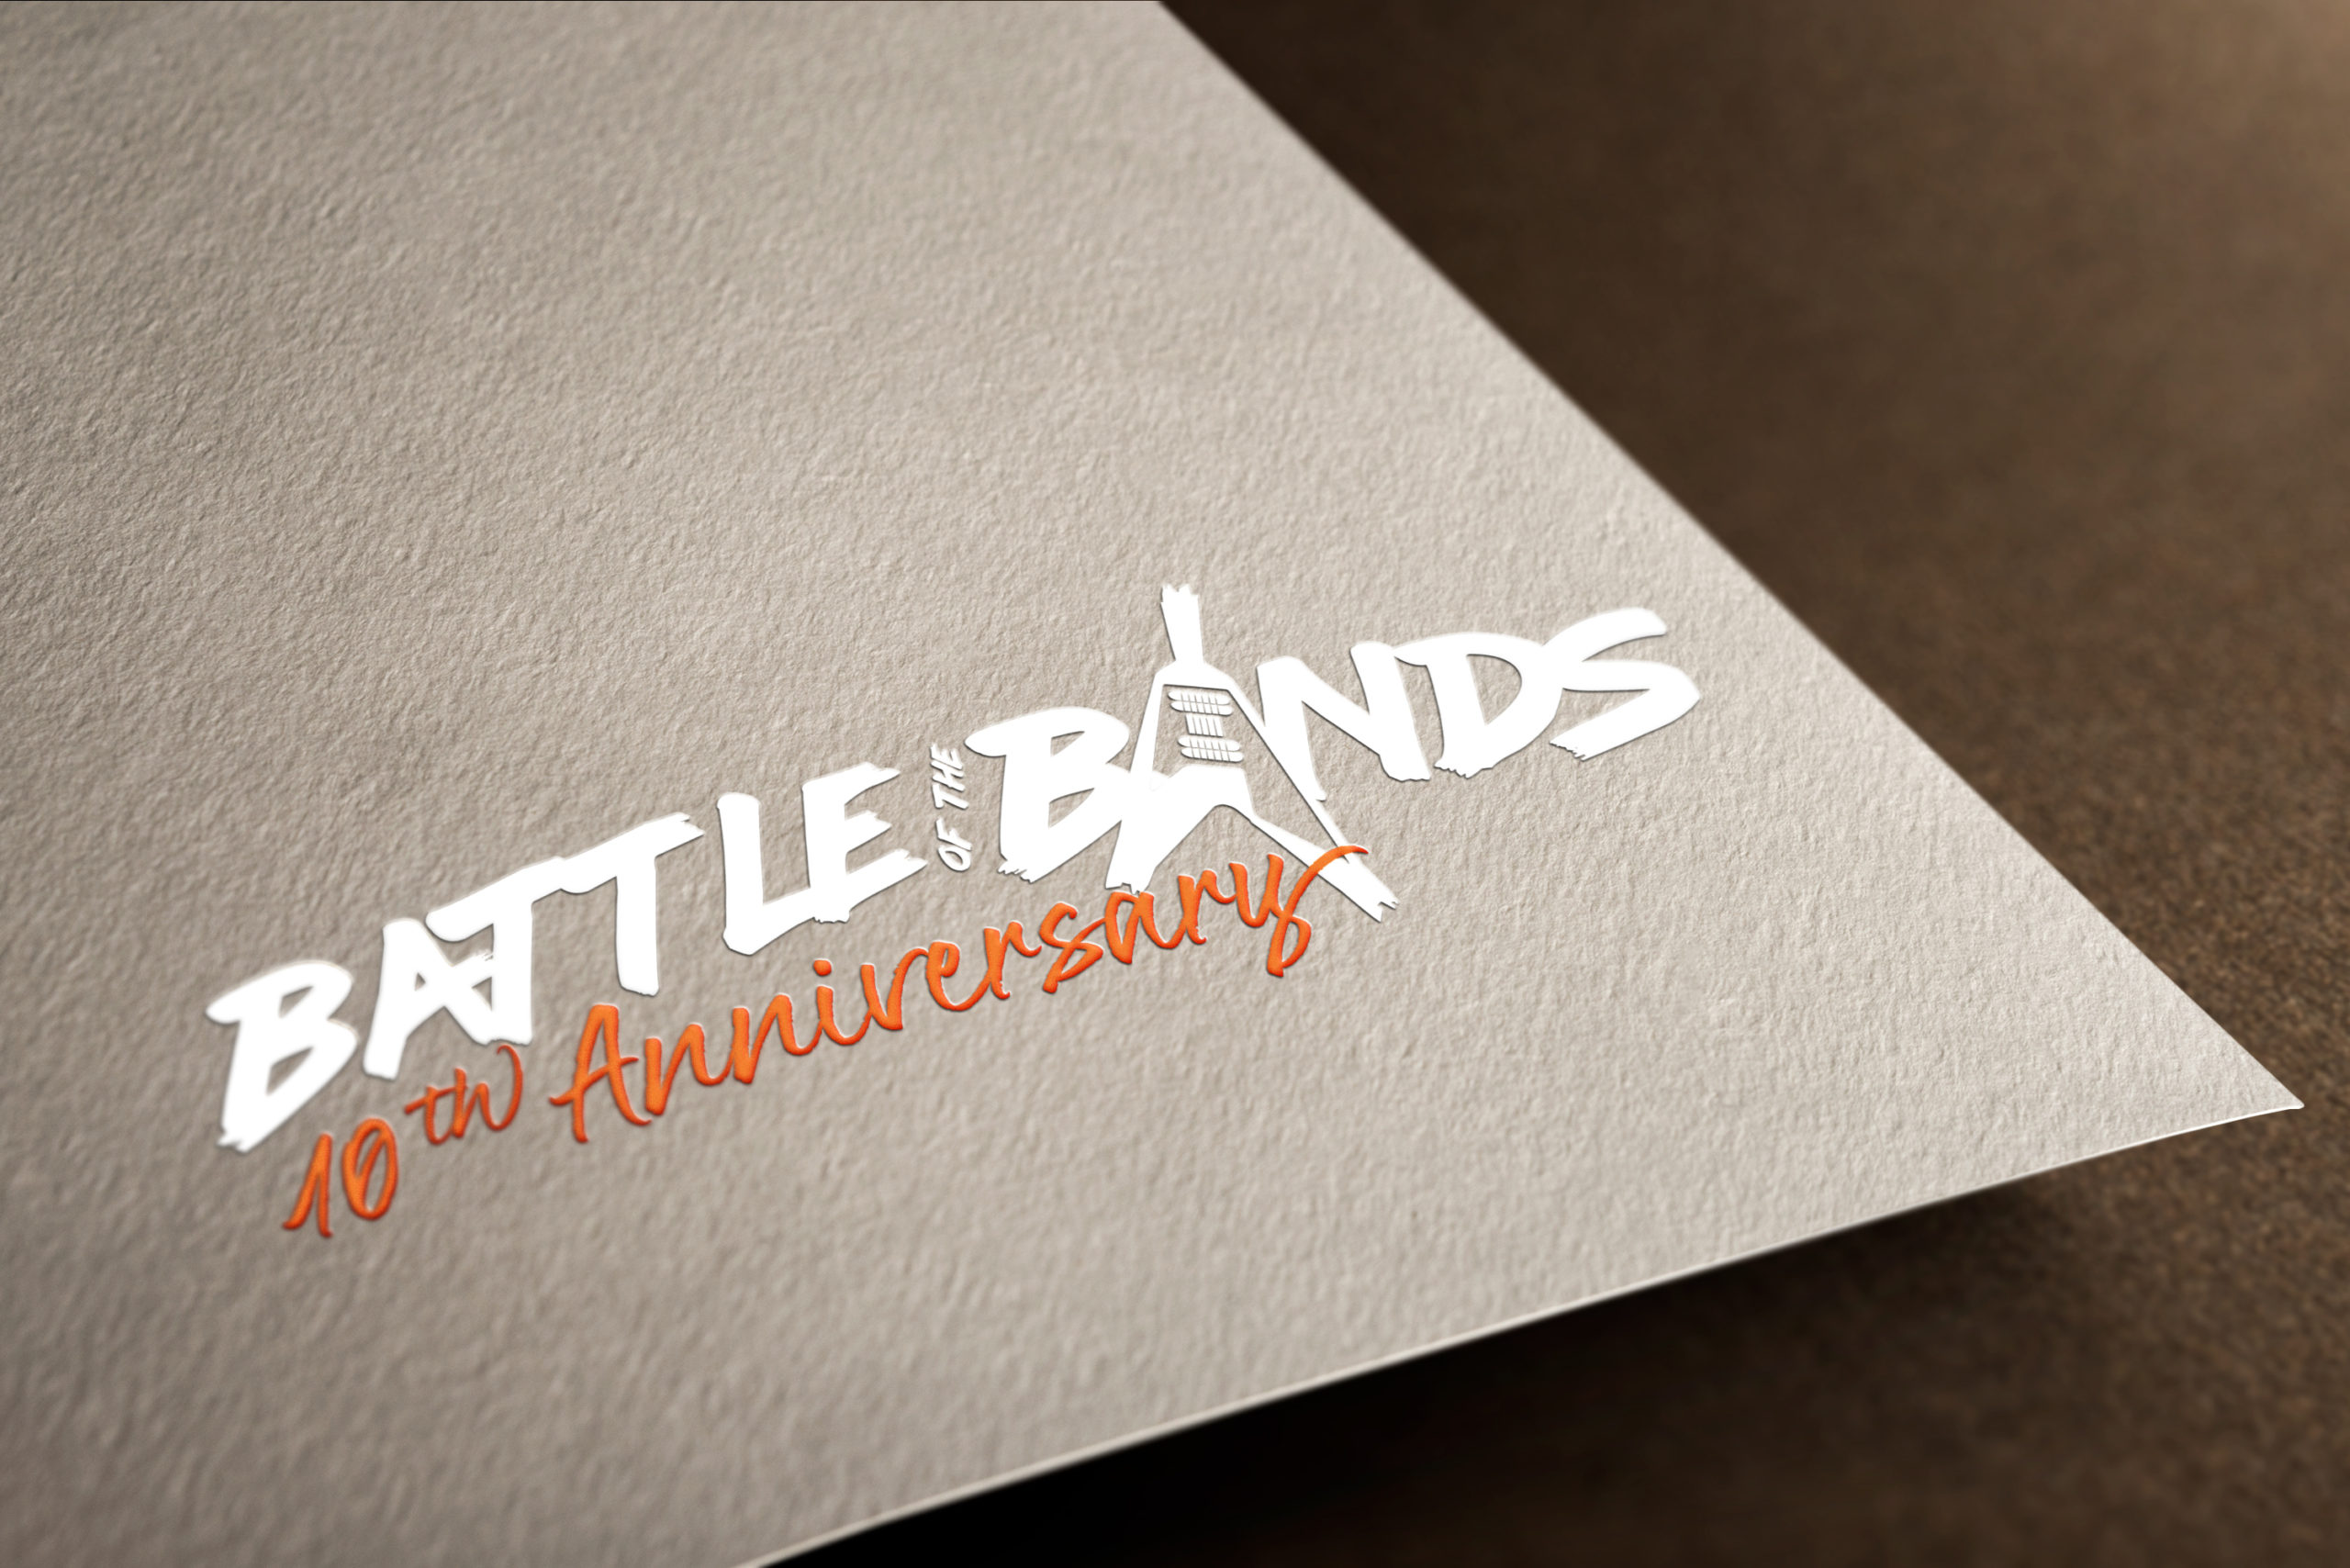 Battle of the Bands logo 1